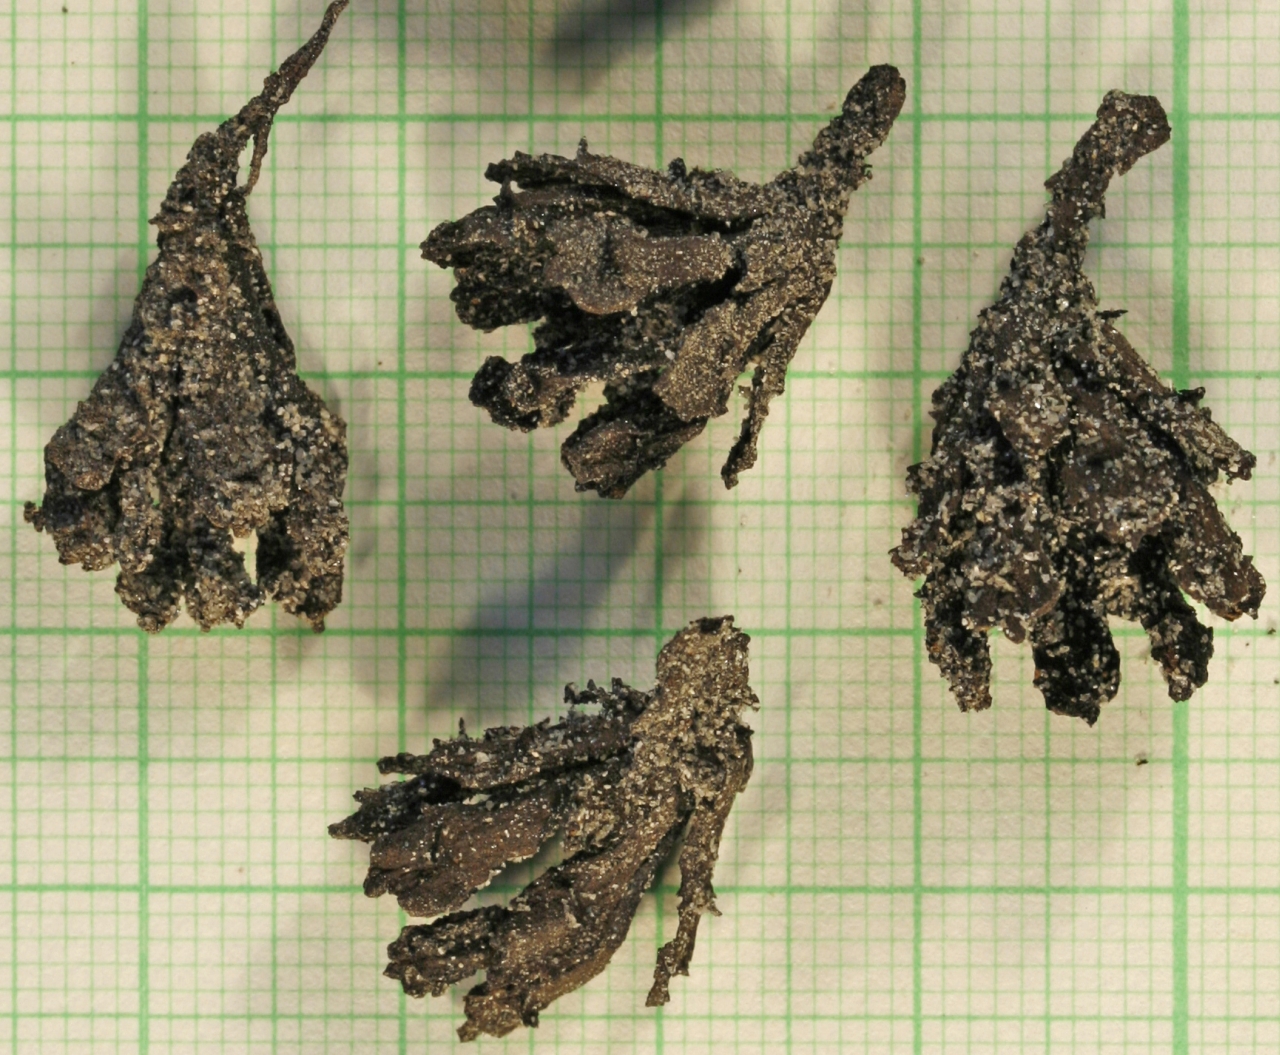 Photograph of fossil Glyptostrobus europaeus seed cones. The photo shows four cones, each with a basal stalk and spreading cone scales. The surfaces of the cones are covered with a light layer of sand. Graph paper in the background gives a sense of scale (cones are probably about 4 cm each).